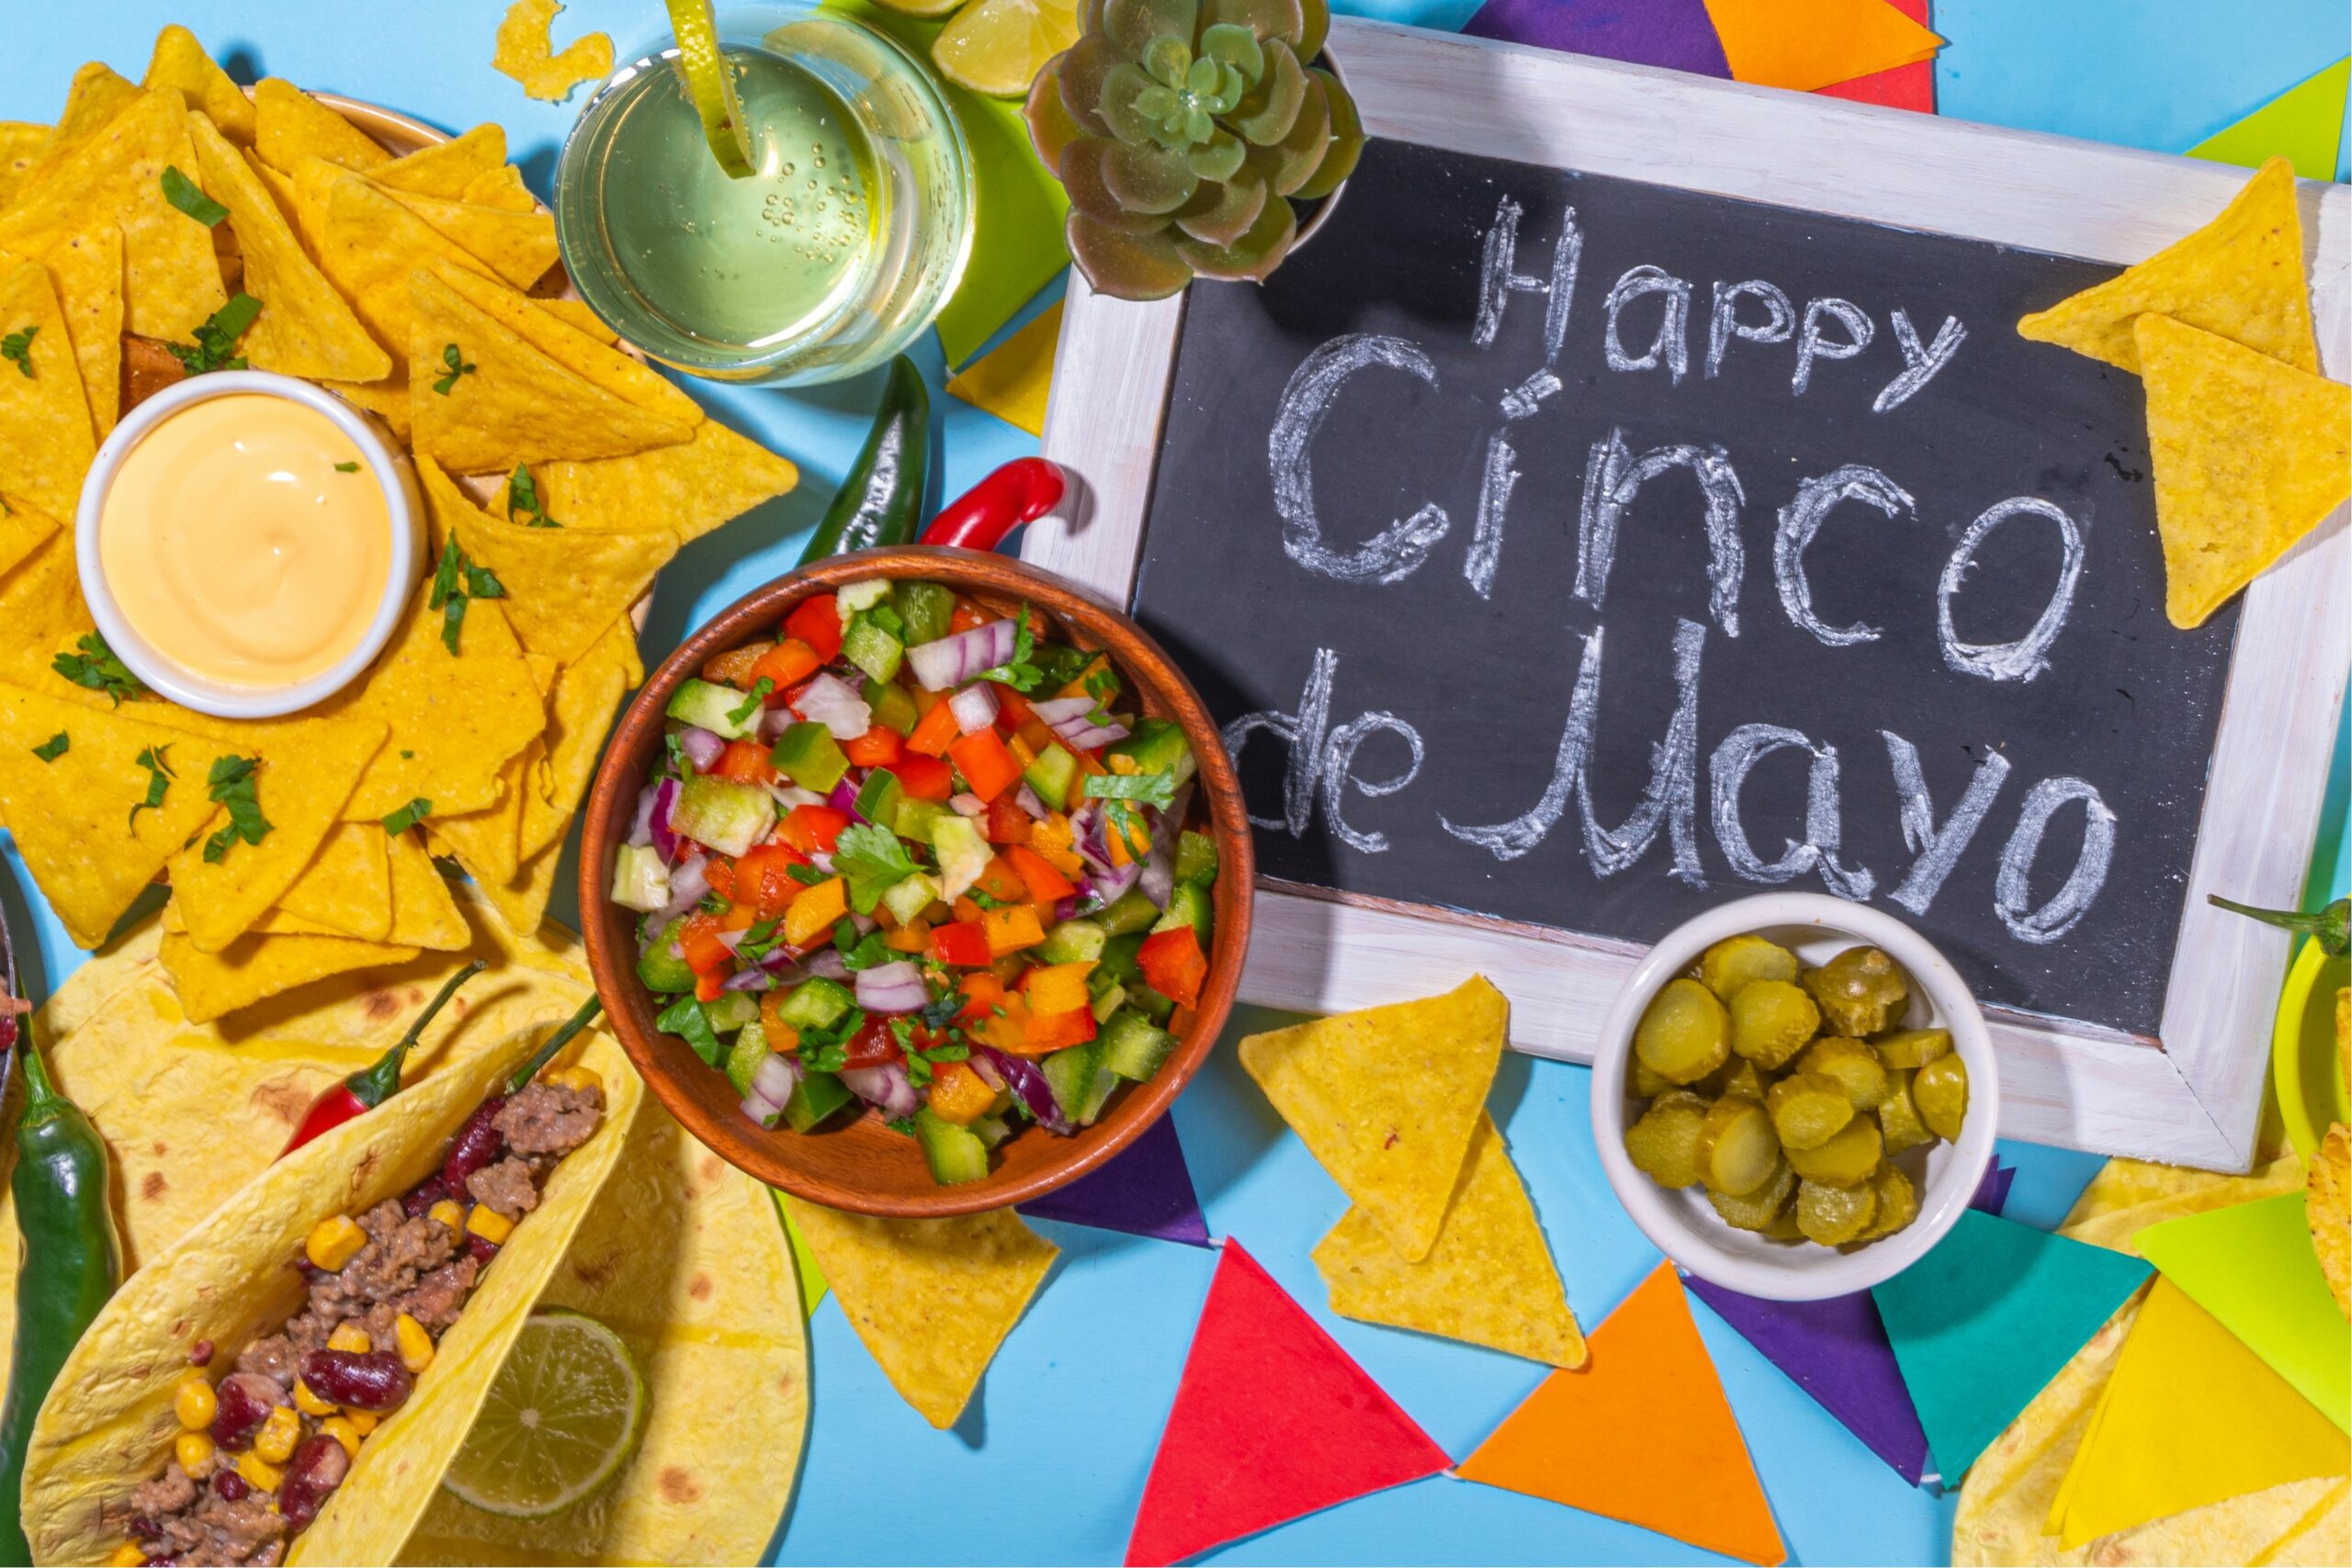 Fun Facts About Cinco de Mayo for Kids